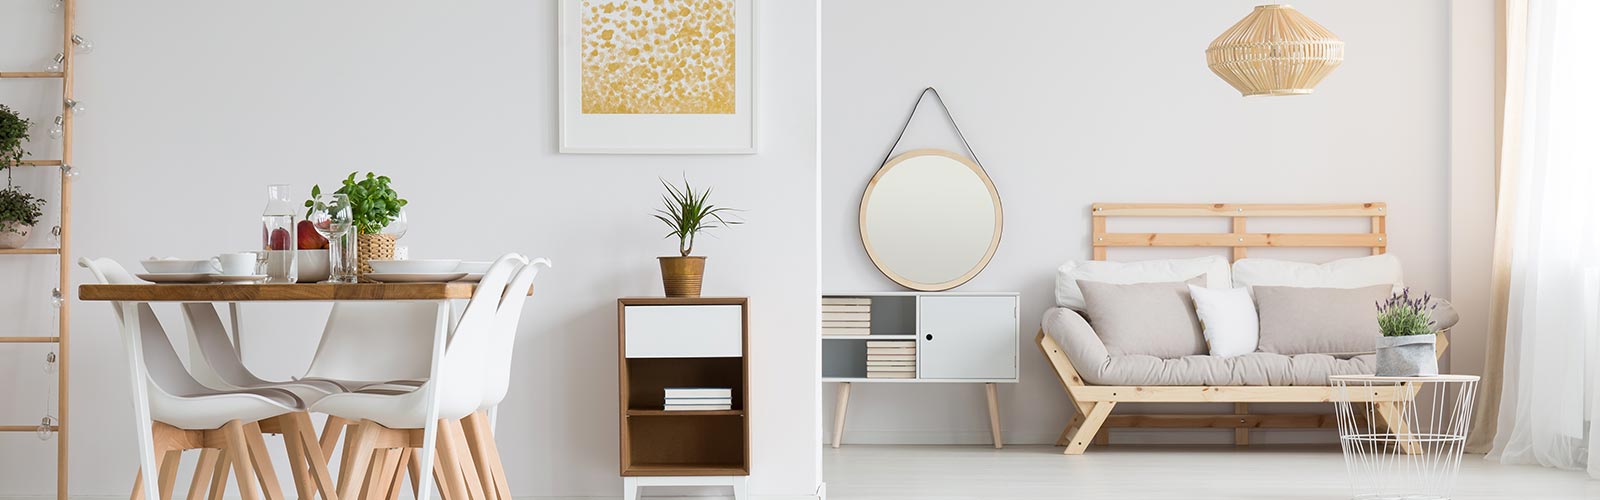 Lagom as an office interior design trend for 2020